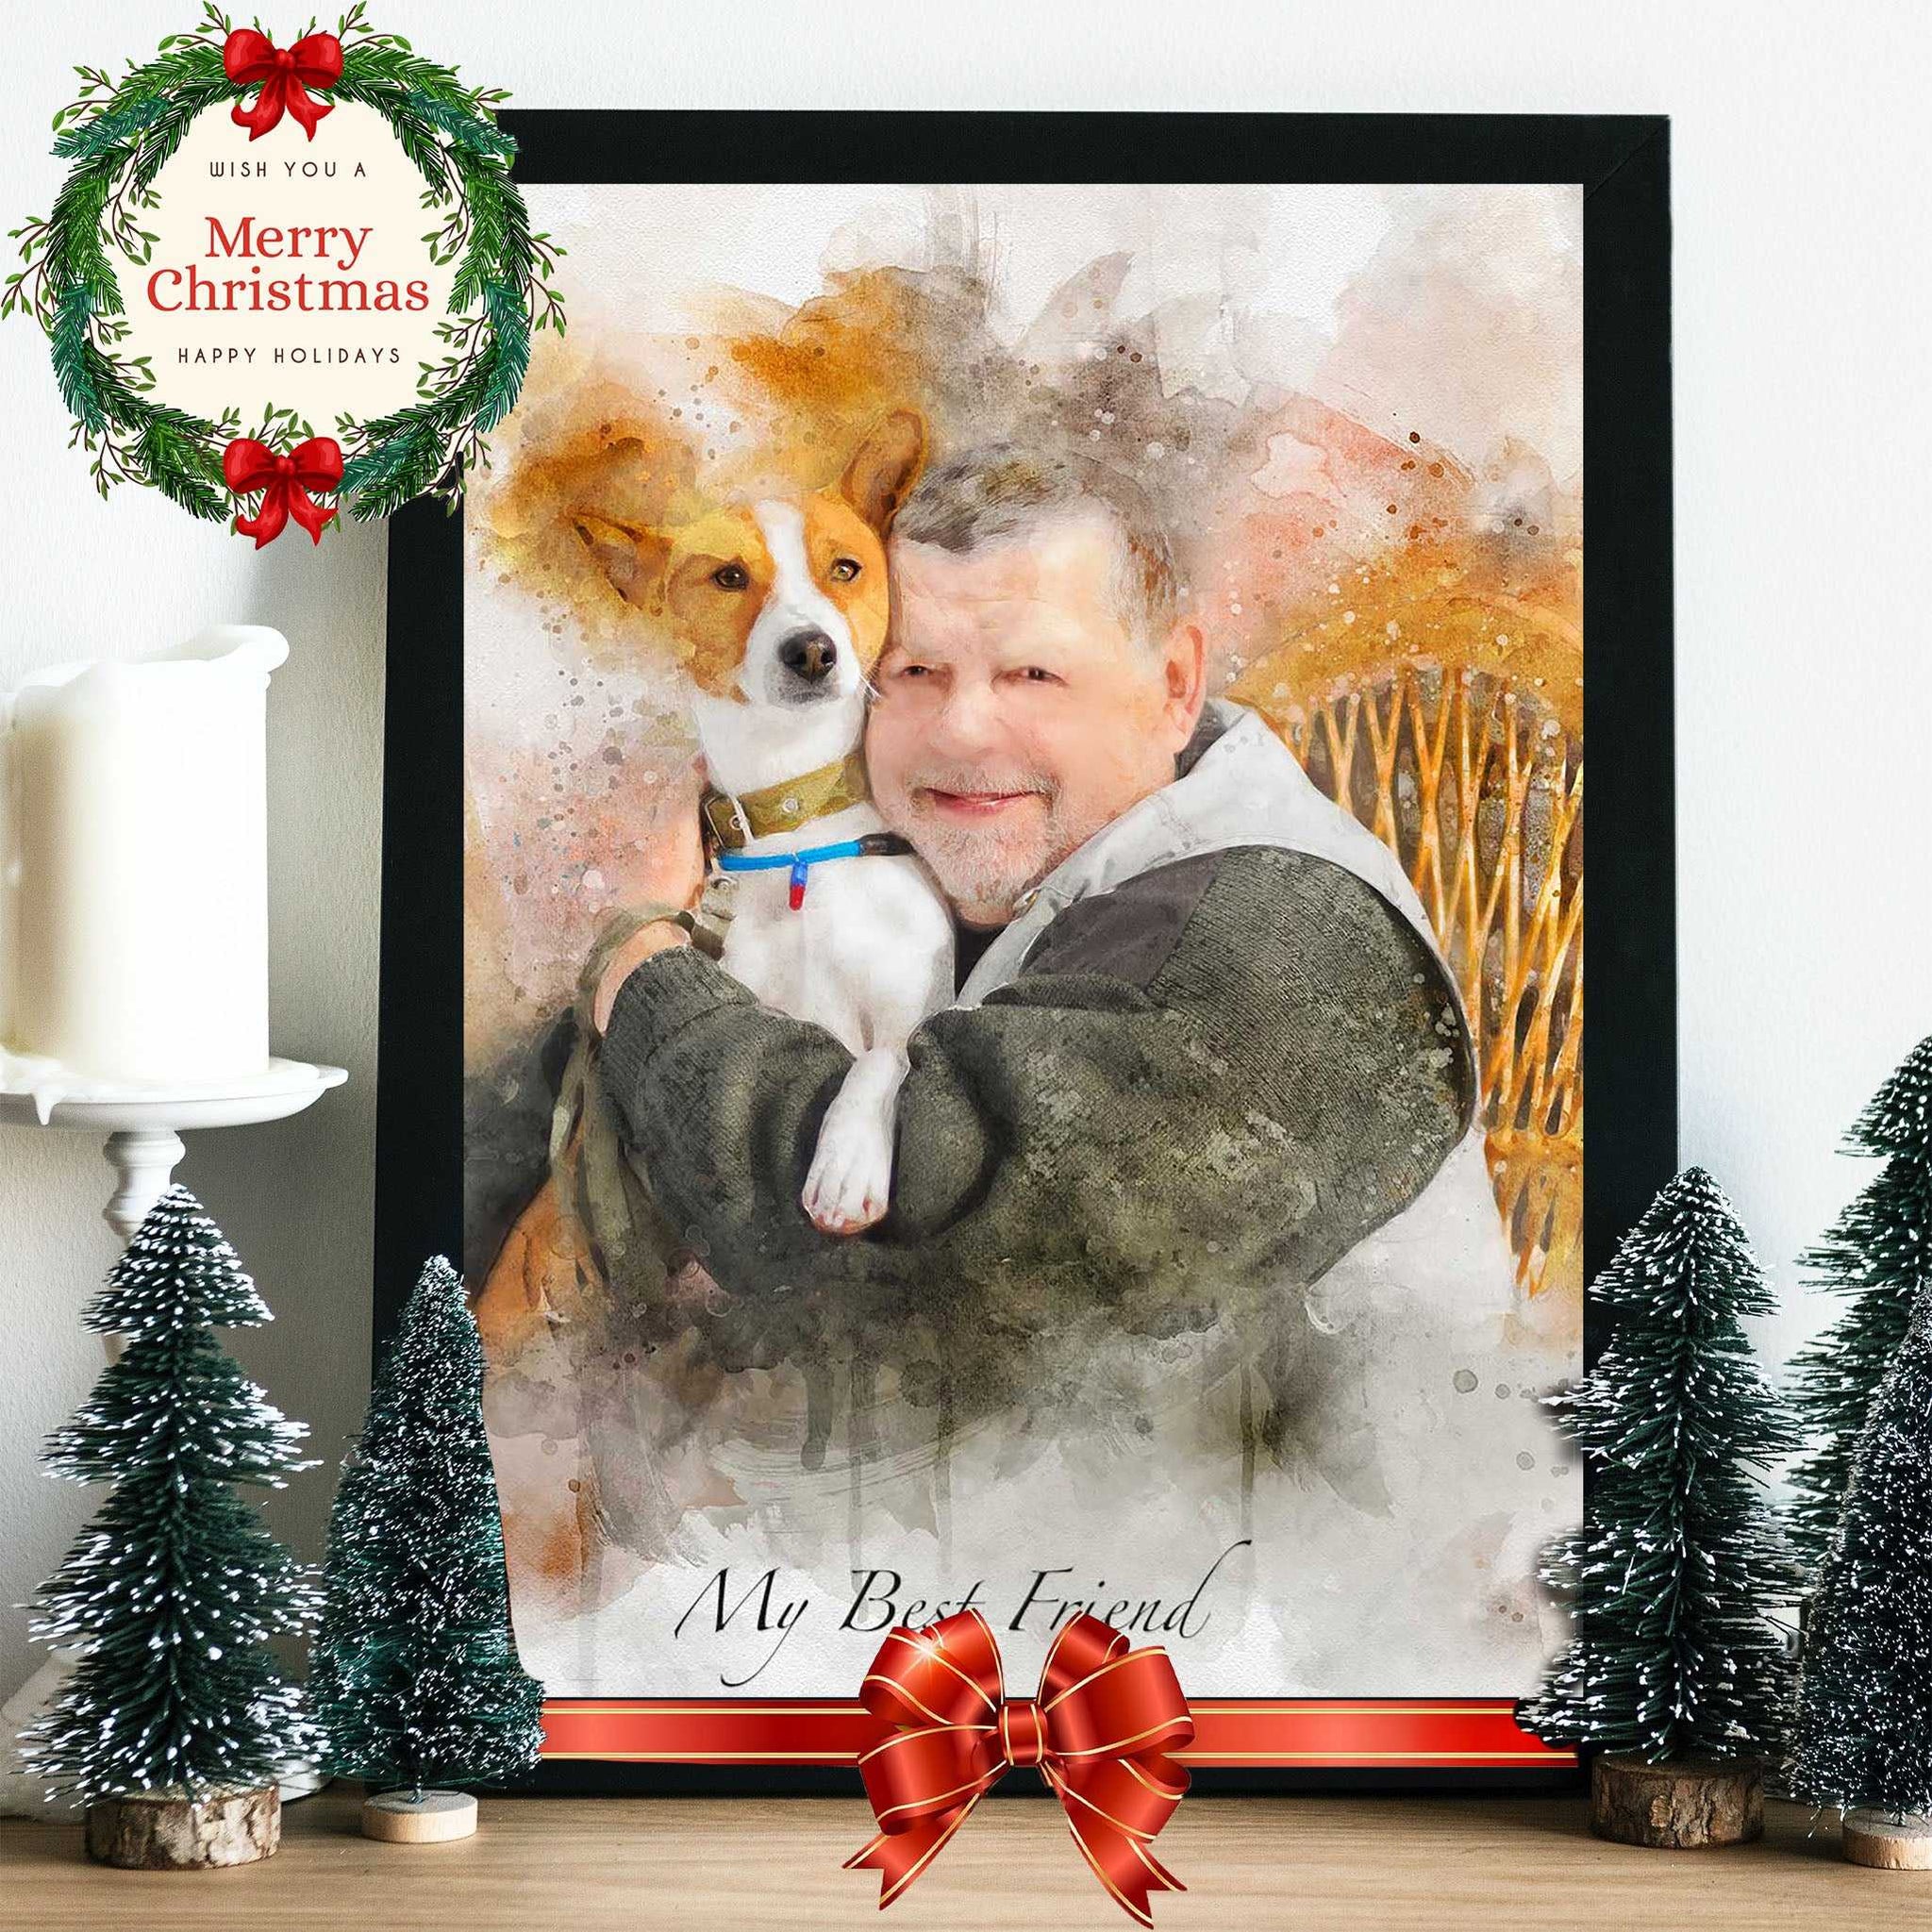 Christmas Gift for Father | Christmas Gift Ideas for your Dad | Father Christmas Gifts - FromPicToArt